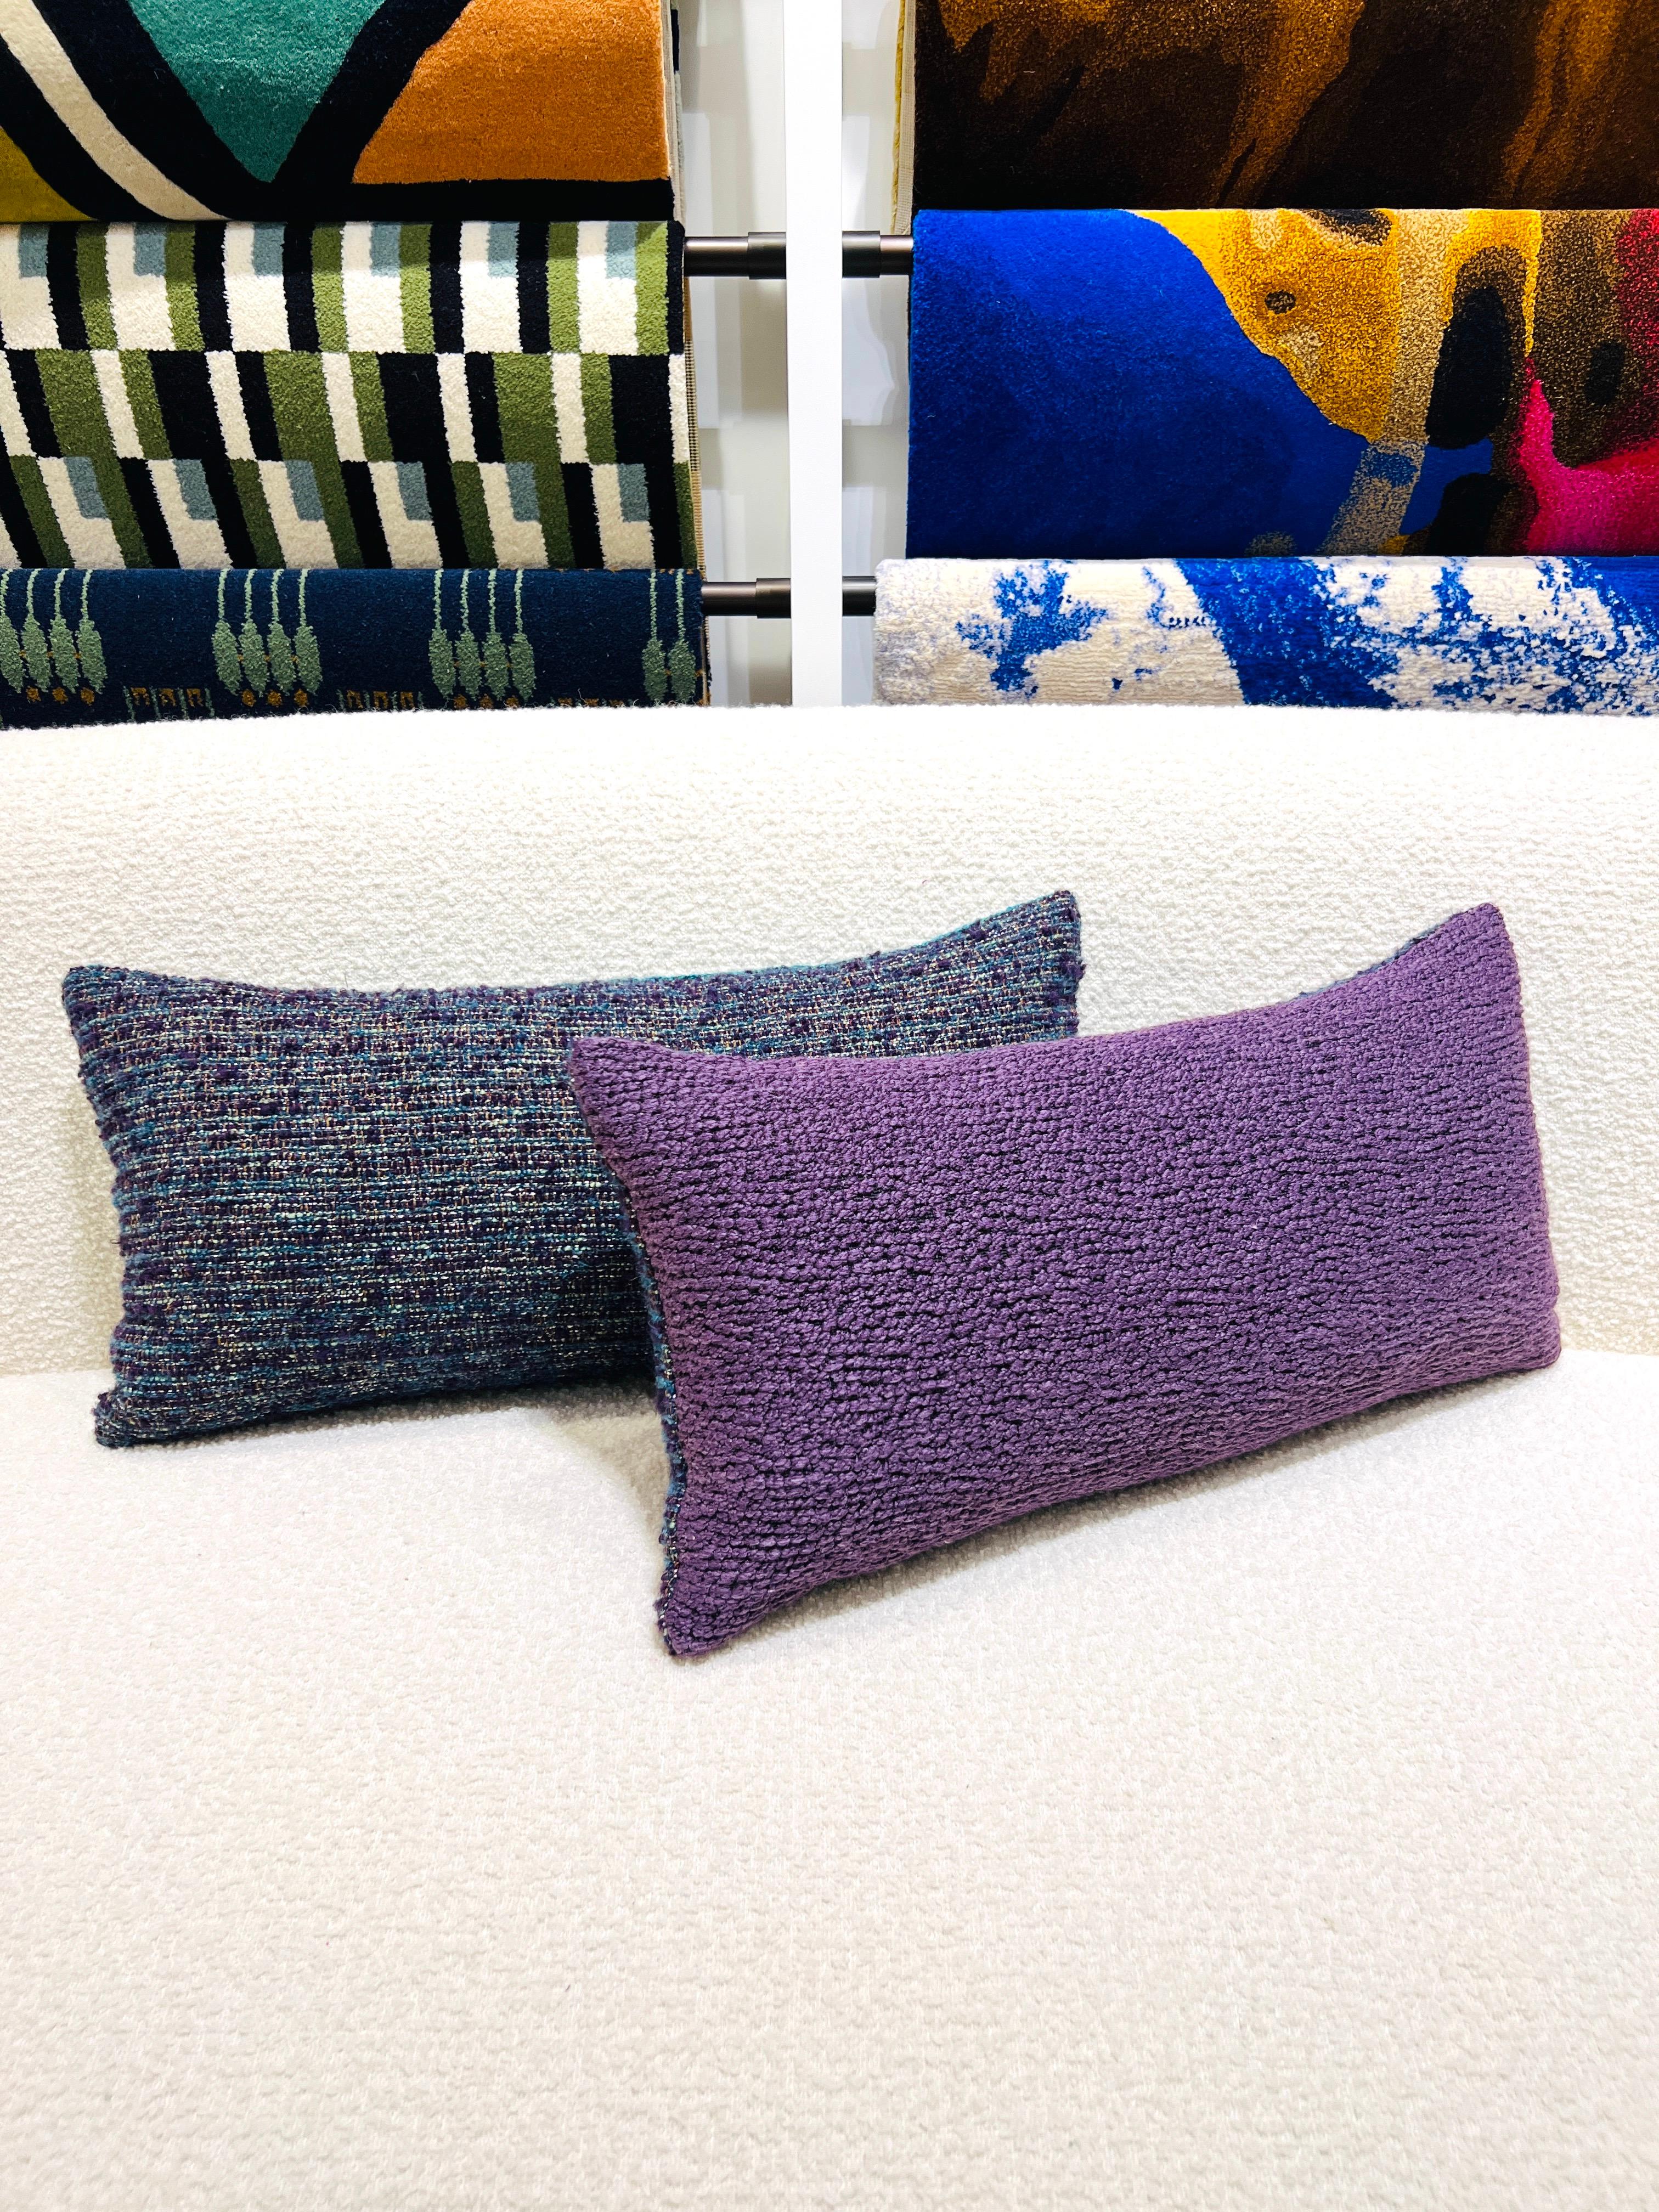 Contemporary Pierre Frey Woven Textured and Boucle Lumbar Pillows in Purple and Aqua For Sale